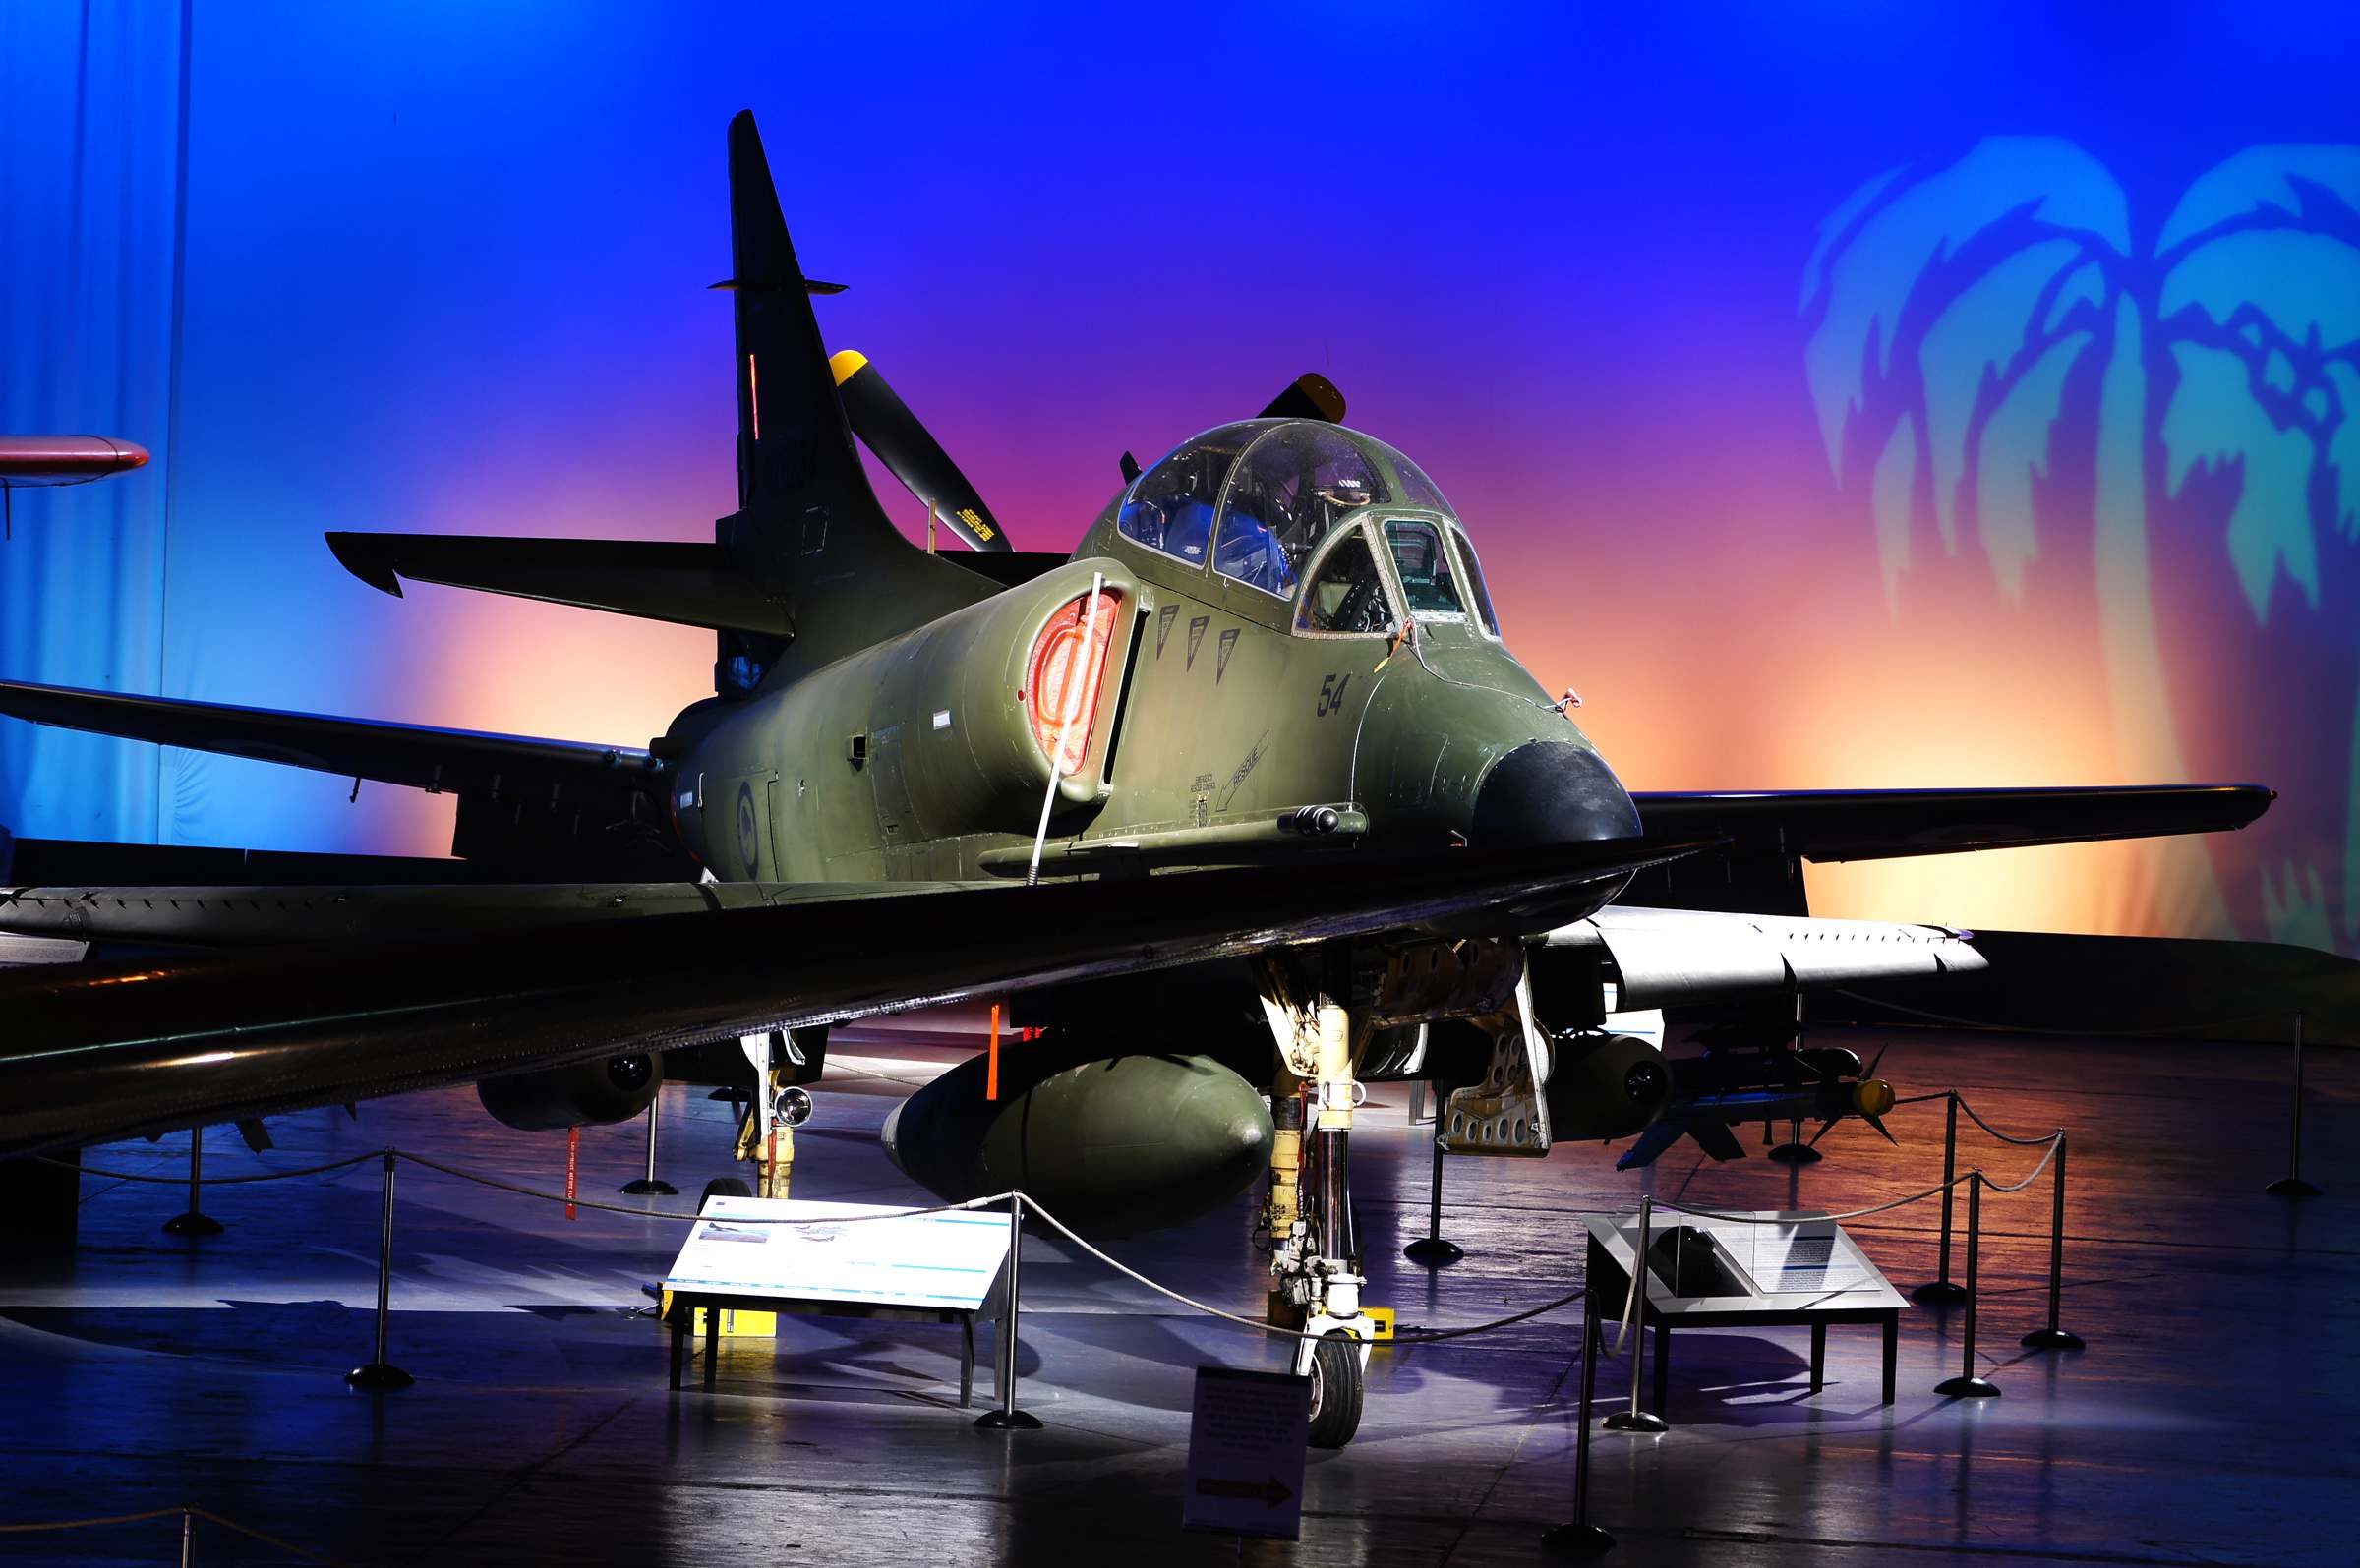 air force nz5 Air Force Museum of New Zealand   Must See Attraction